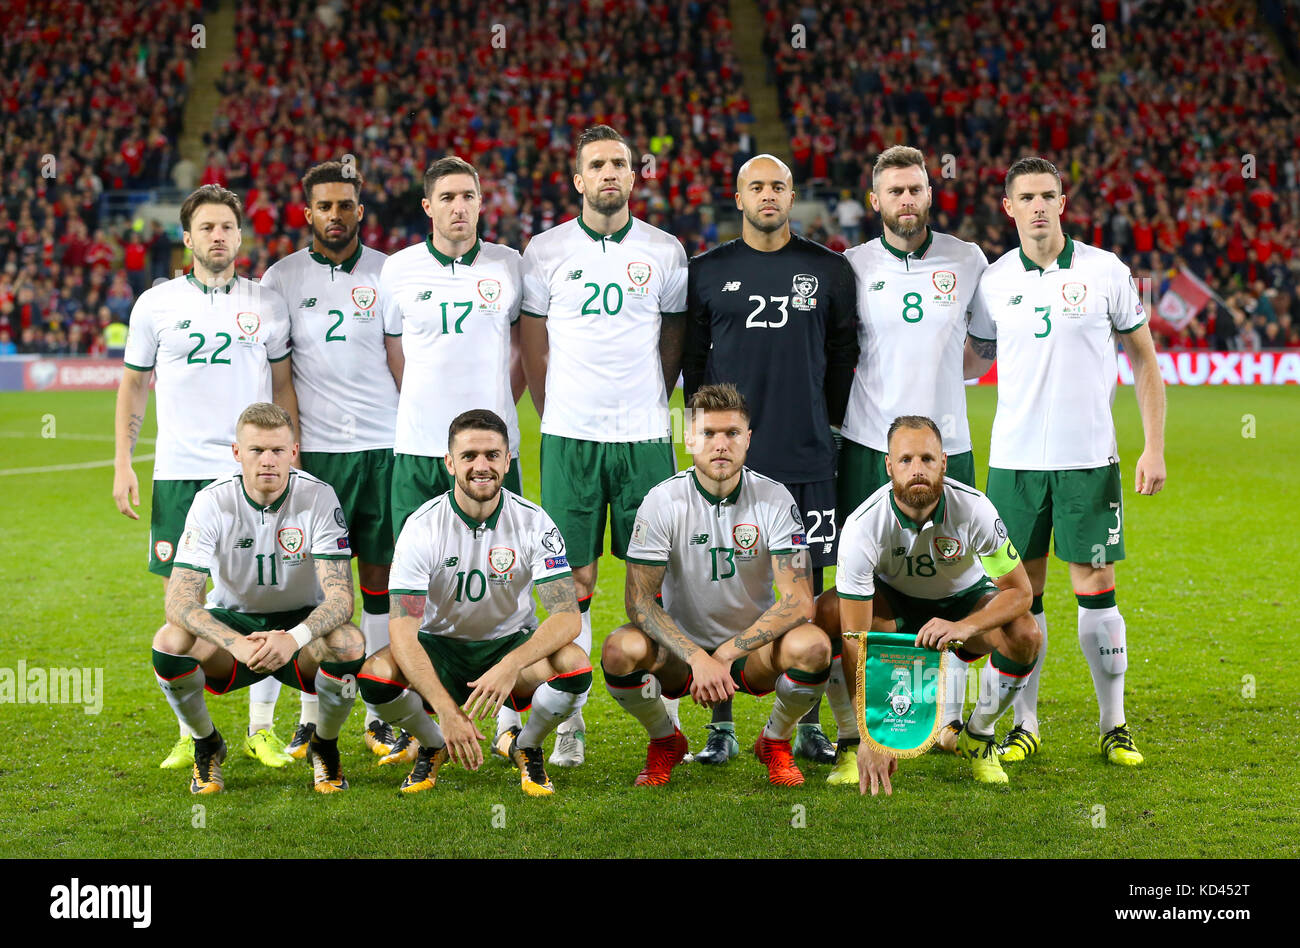 Republic of Ireland team group shot. Top Row (left to right) Harry Arter, Cyrus Christie, Stephen Ward, Shane Duffy, Darren Randolph, Daryl Murphy and Ciaran Clark. Bottom row (left to right) James McClean, Robbie Brady, Jeff Hendrick and David Meyler during the 2018 FIFA World Cup Qualifying Group D match at the Cardiff City Stadium, Cardiff. Stock Photo